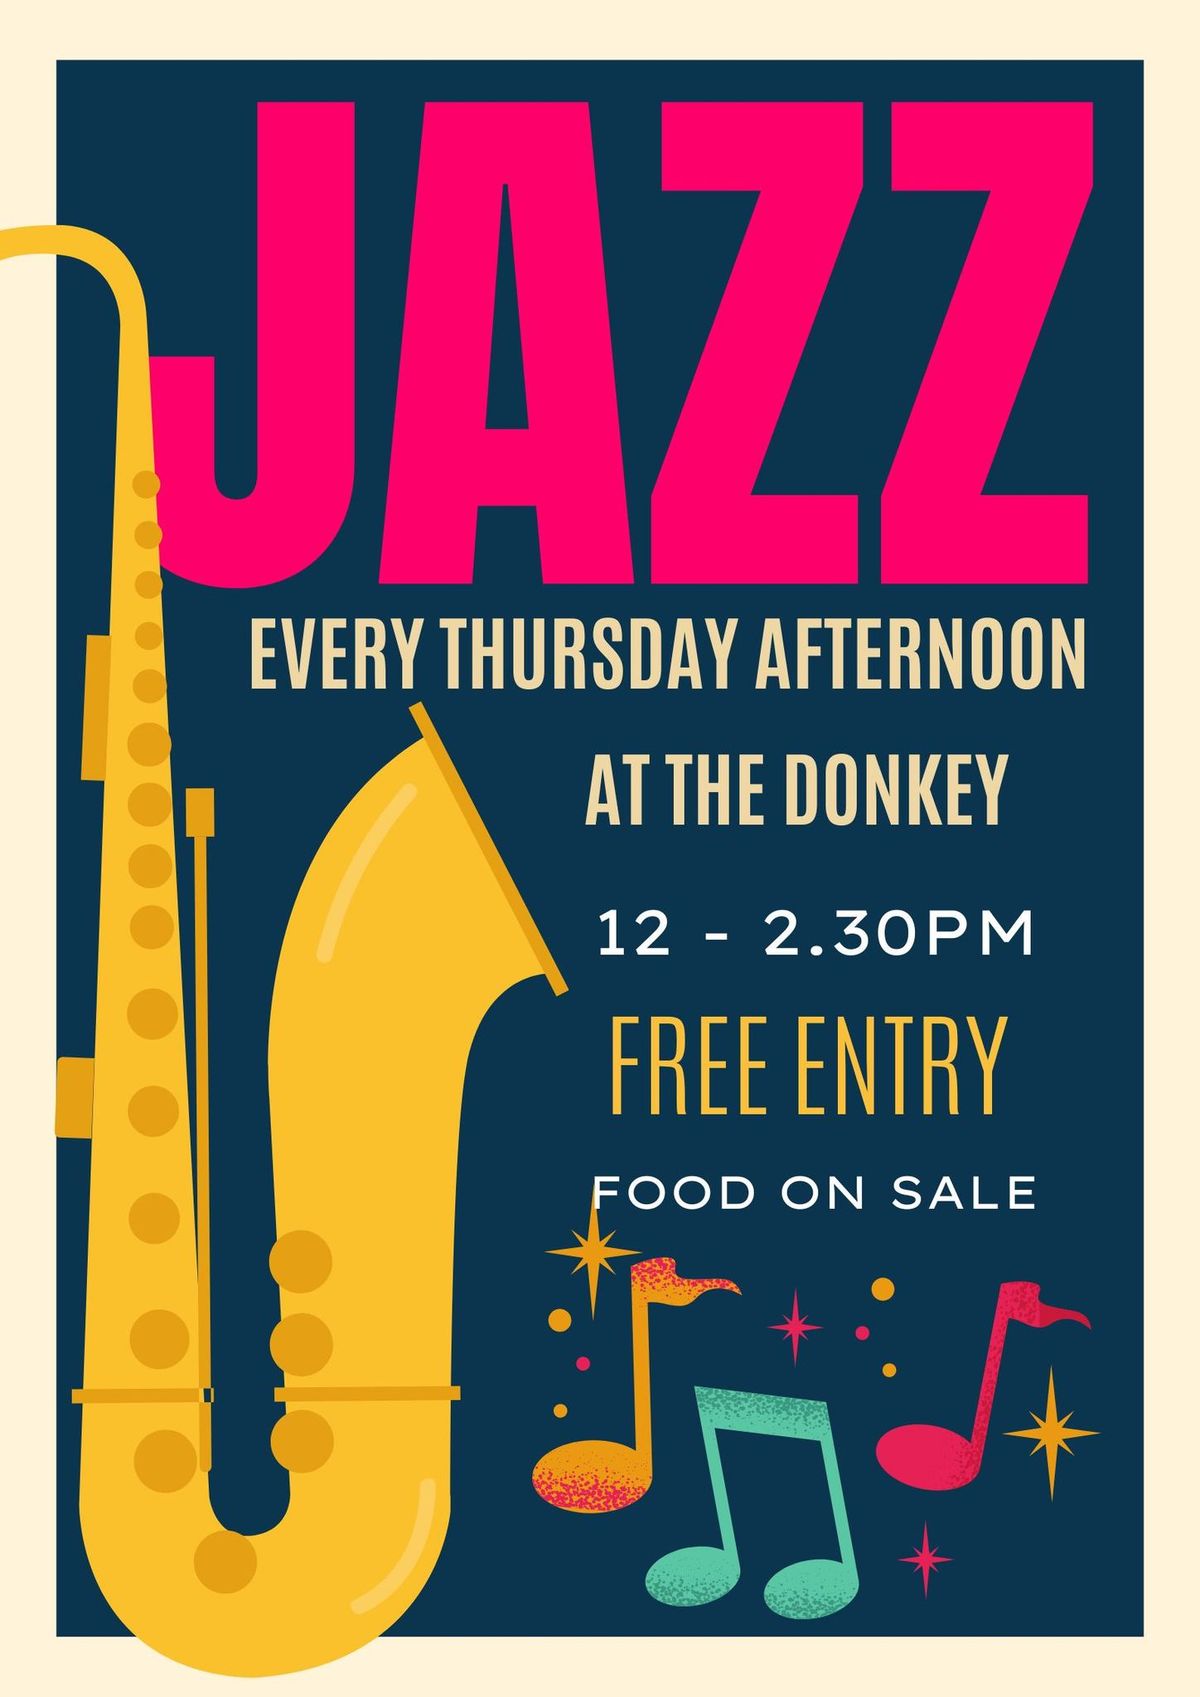 Live Jazz every Thursday afternoon at the Donkey (Free entry)